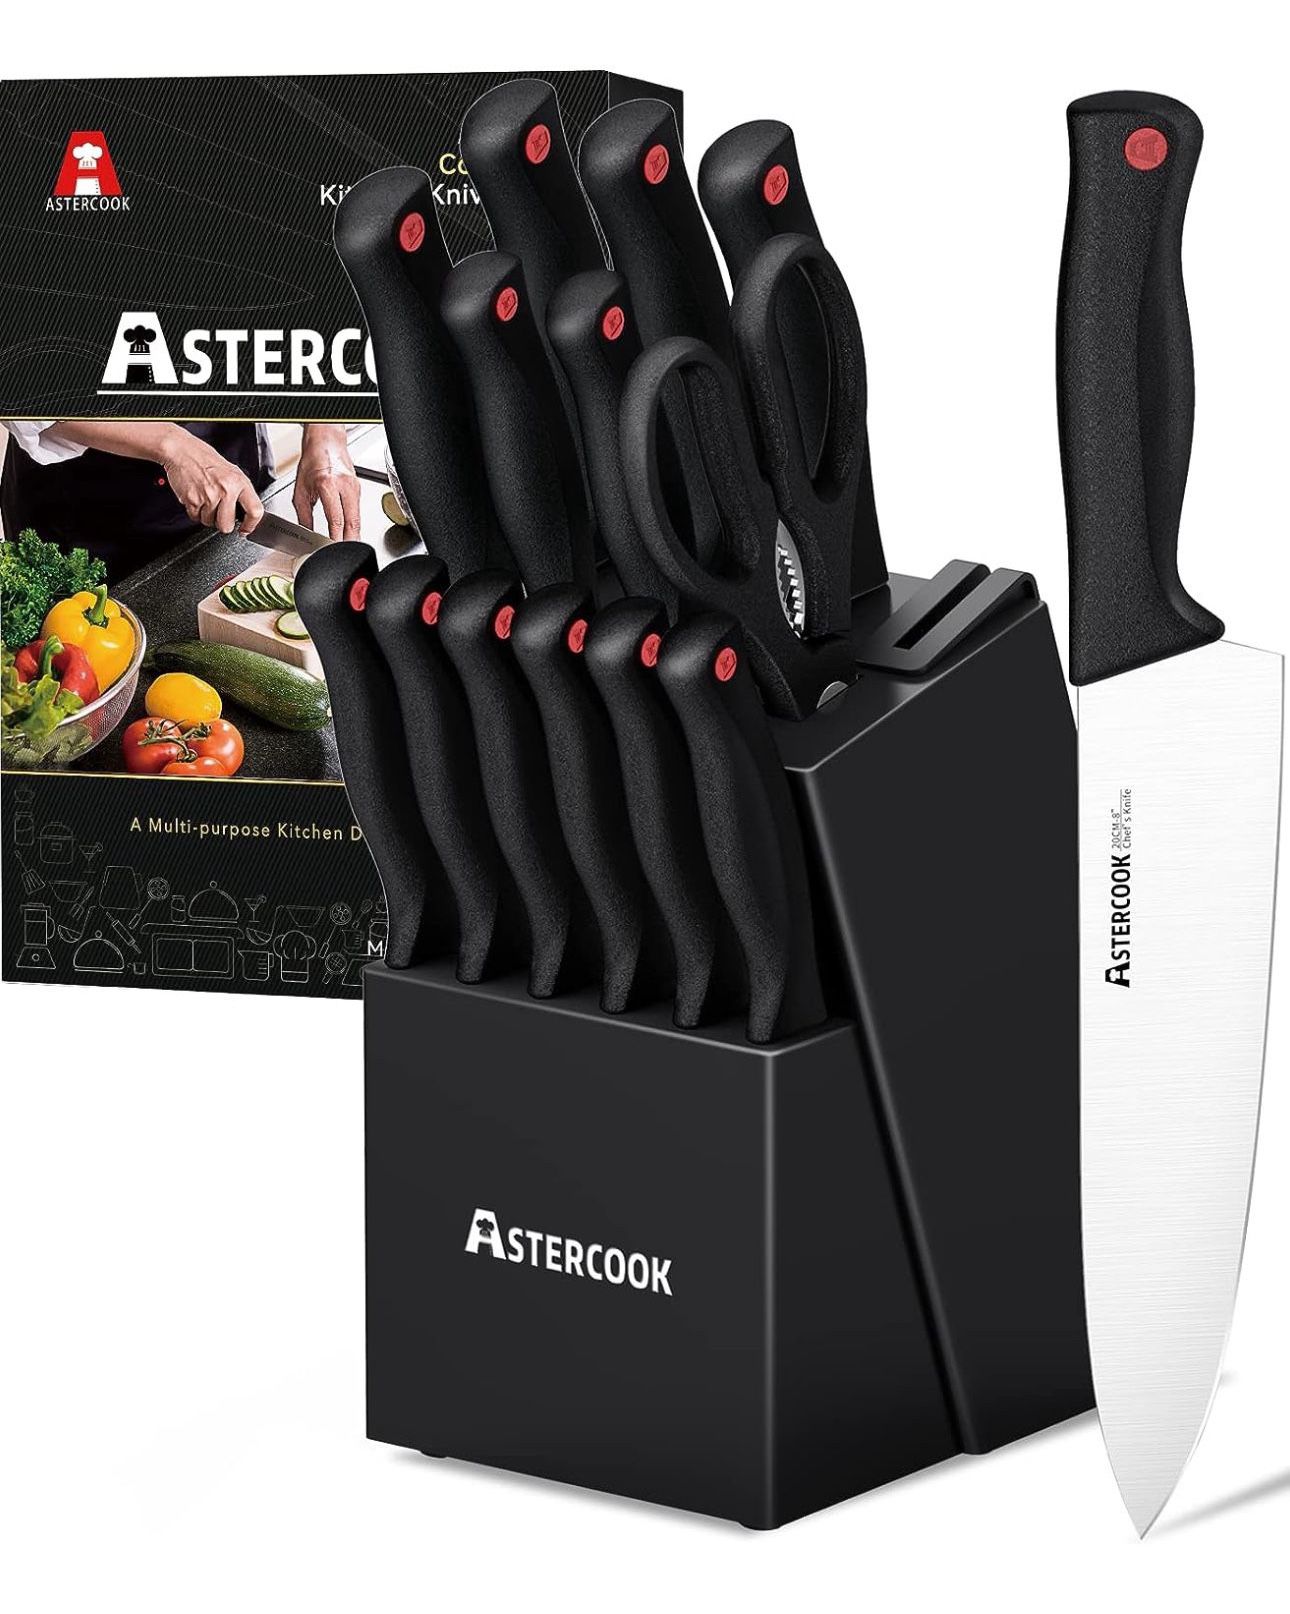 Astercook All In One Complete 15pcs Kitchen K-set $35